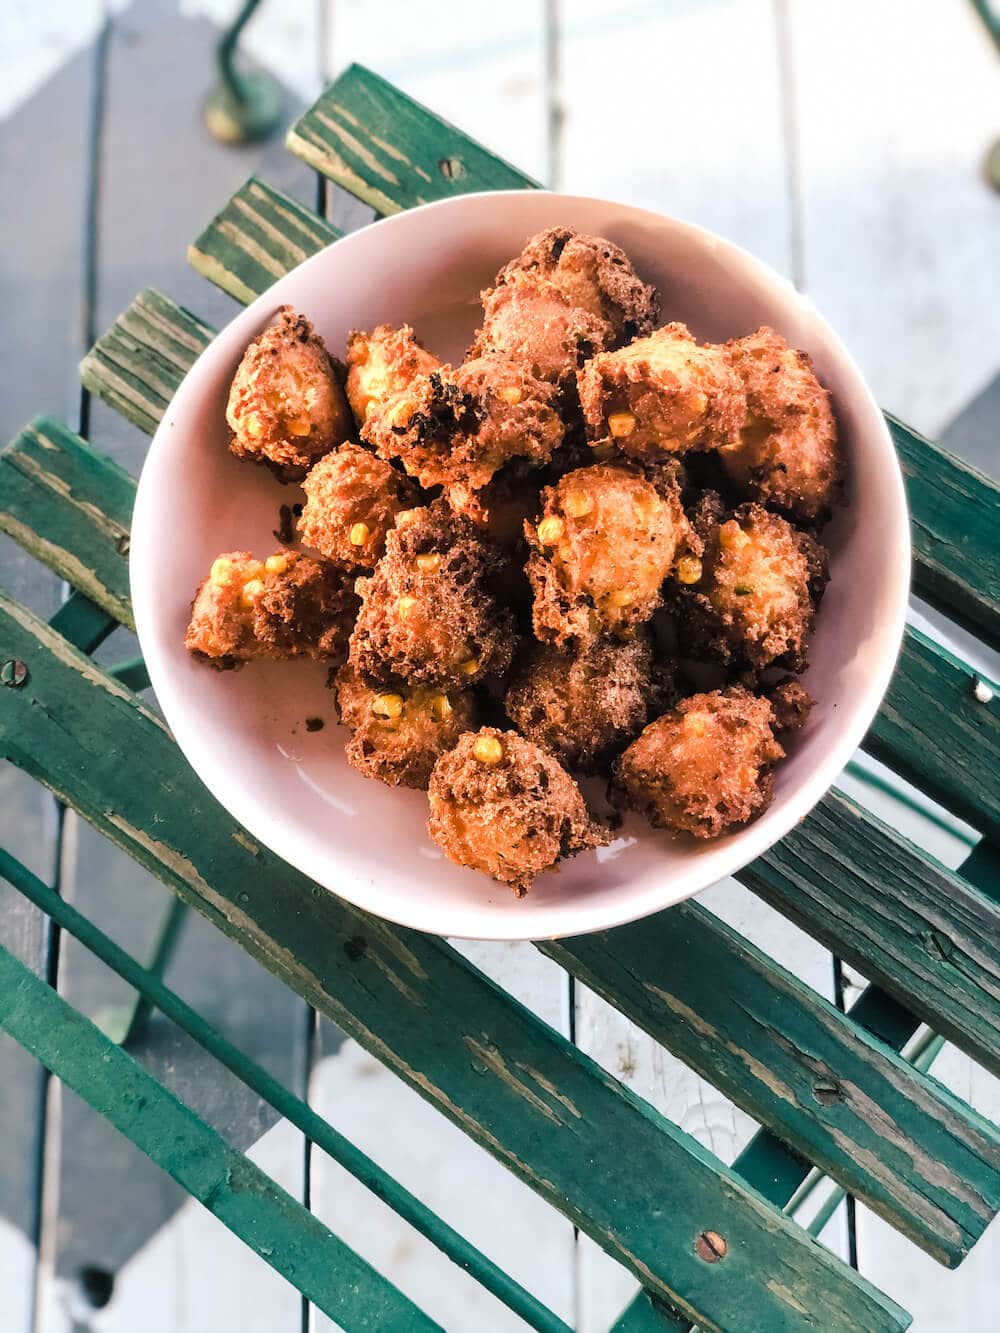 Stacy Lyn's no-fail southern hushpuppies